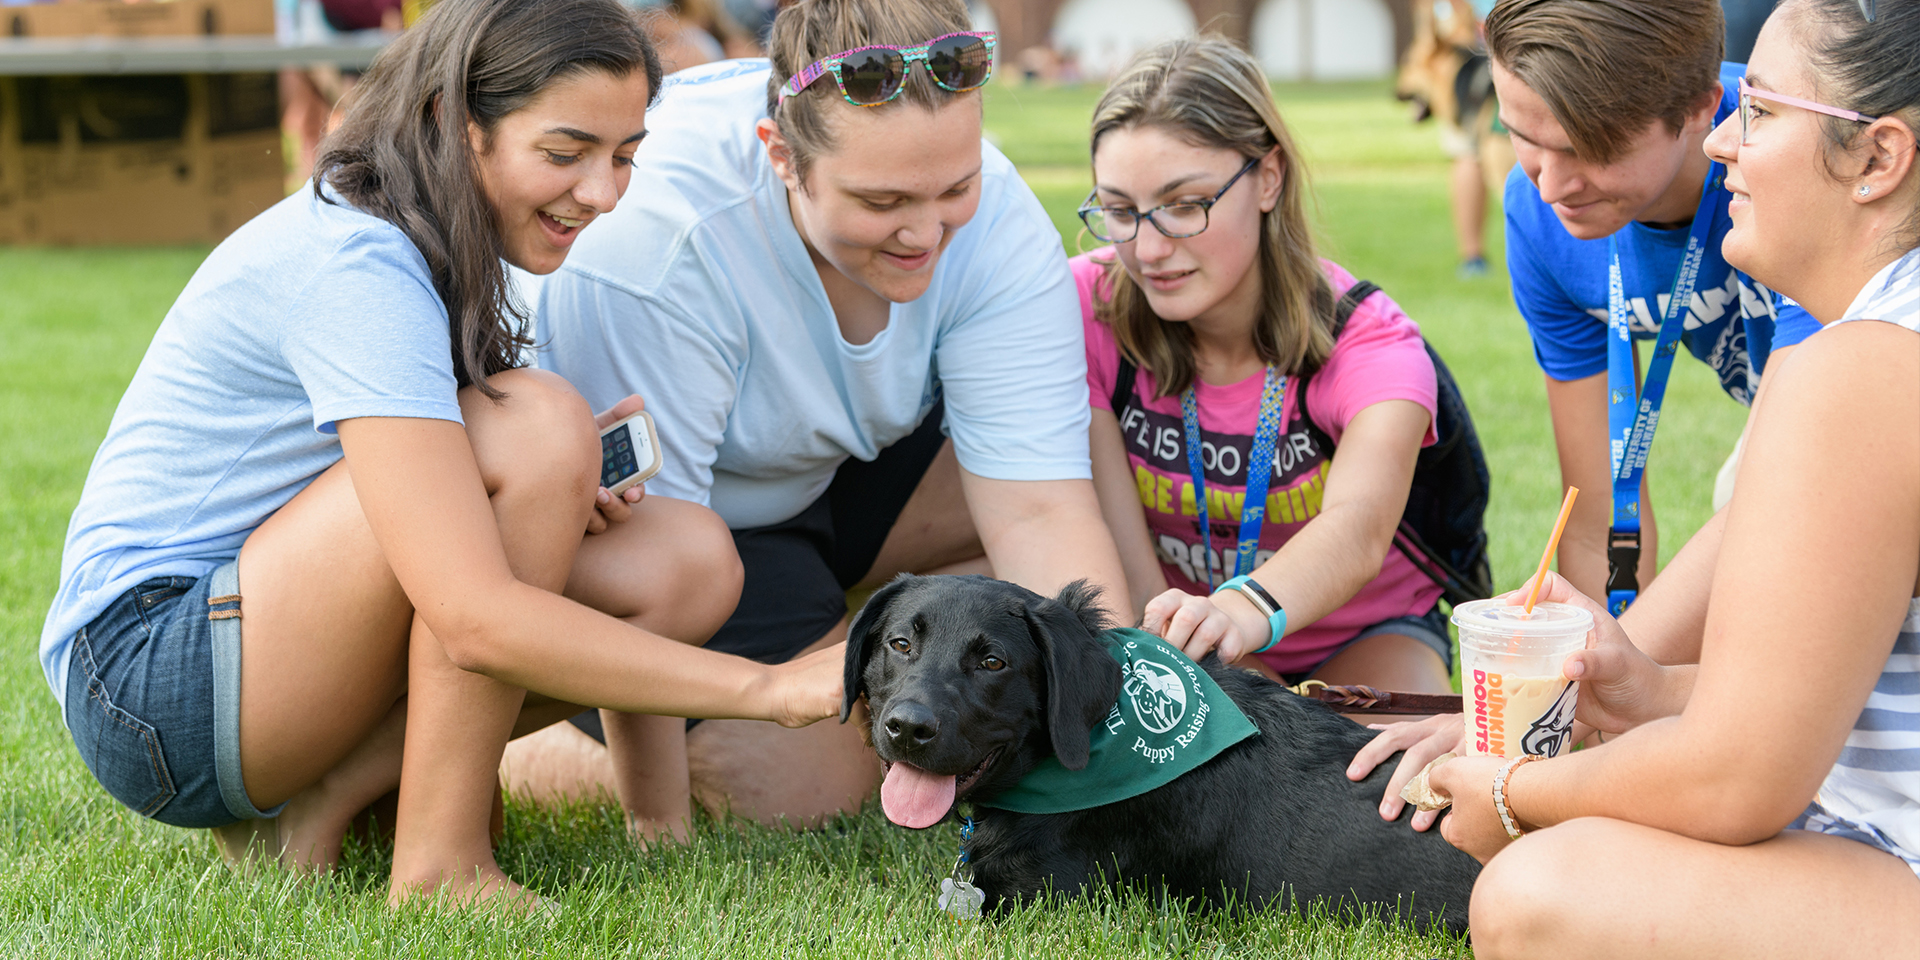 Students gather around a service dog in training on the University green.